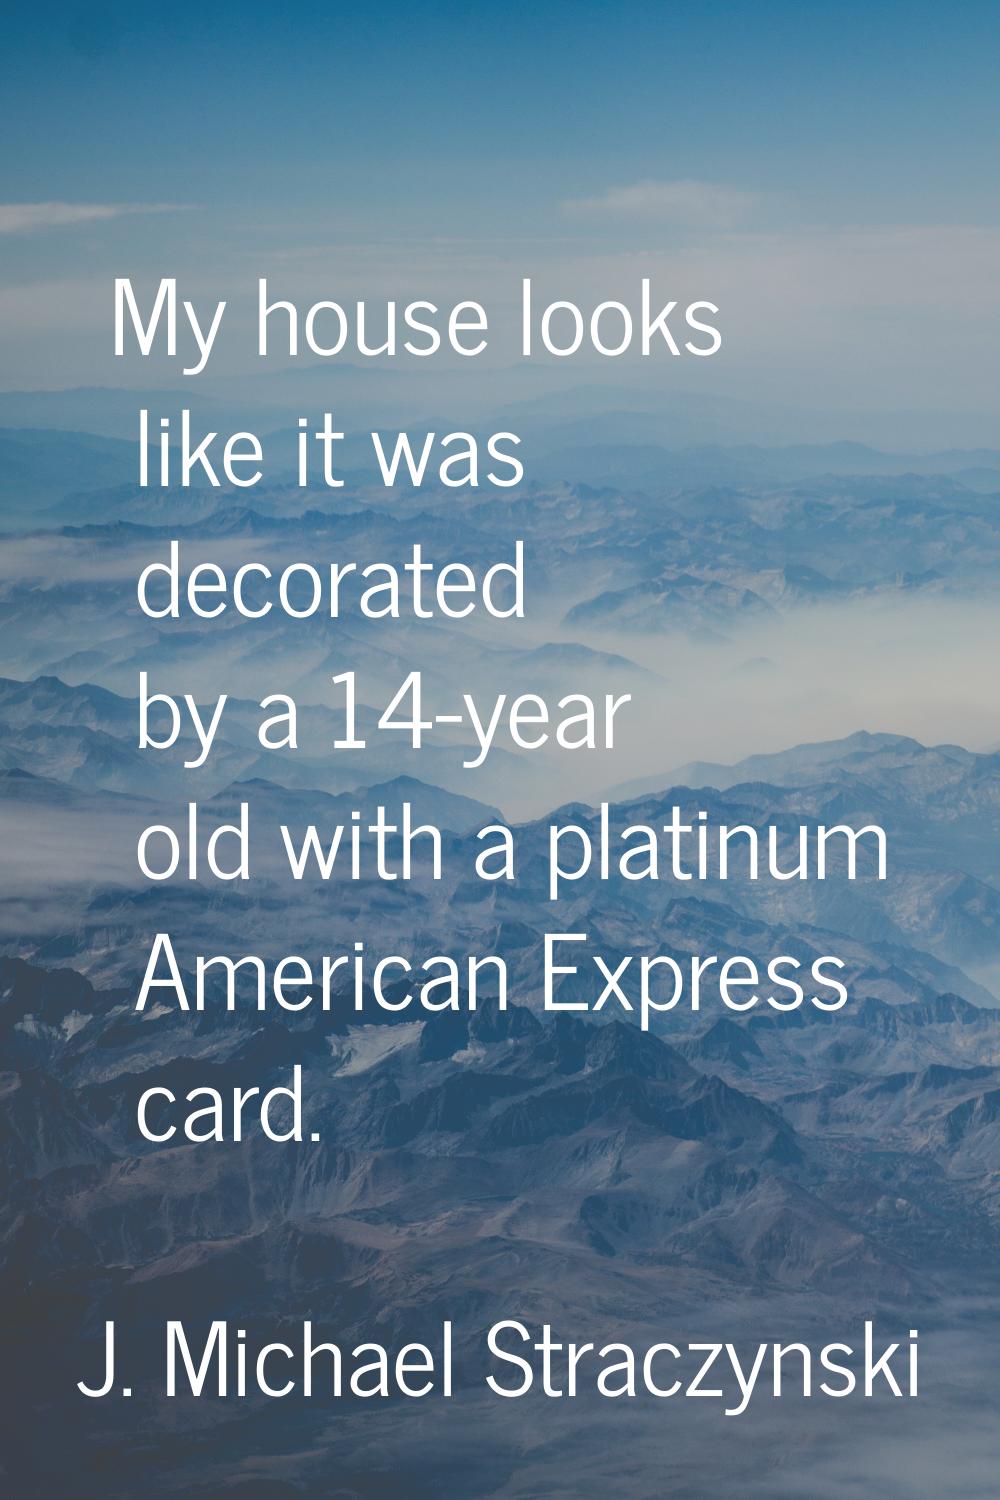 My house looks like it was decorated by a 14-year old with a platinum American Express card.